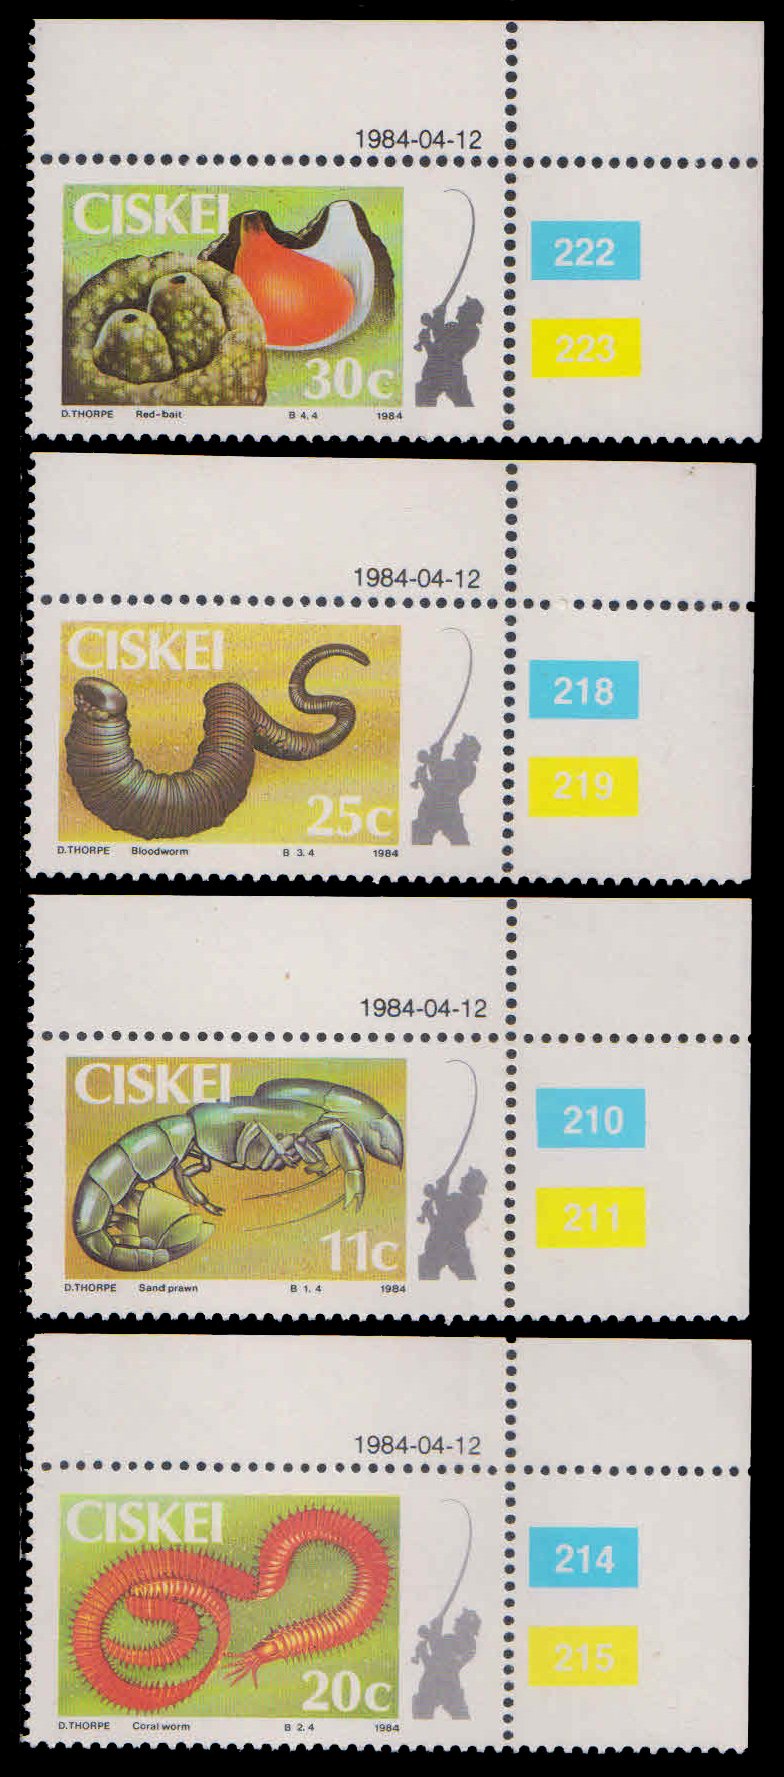 CISKEI 1984-Fish Bait, Coral Worm-Red Bait, Set of 4, MNH, S.G. 56-59